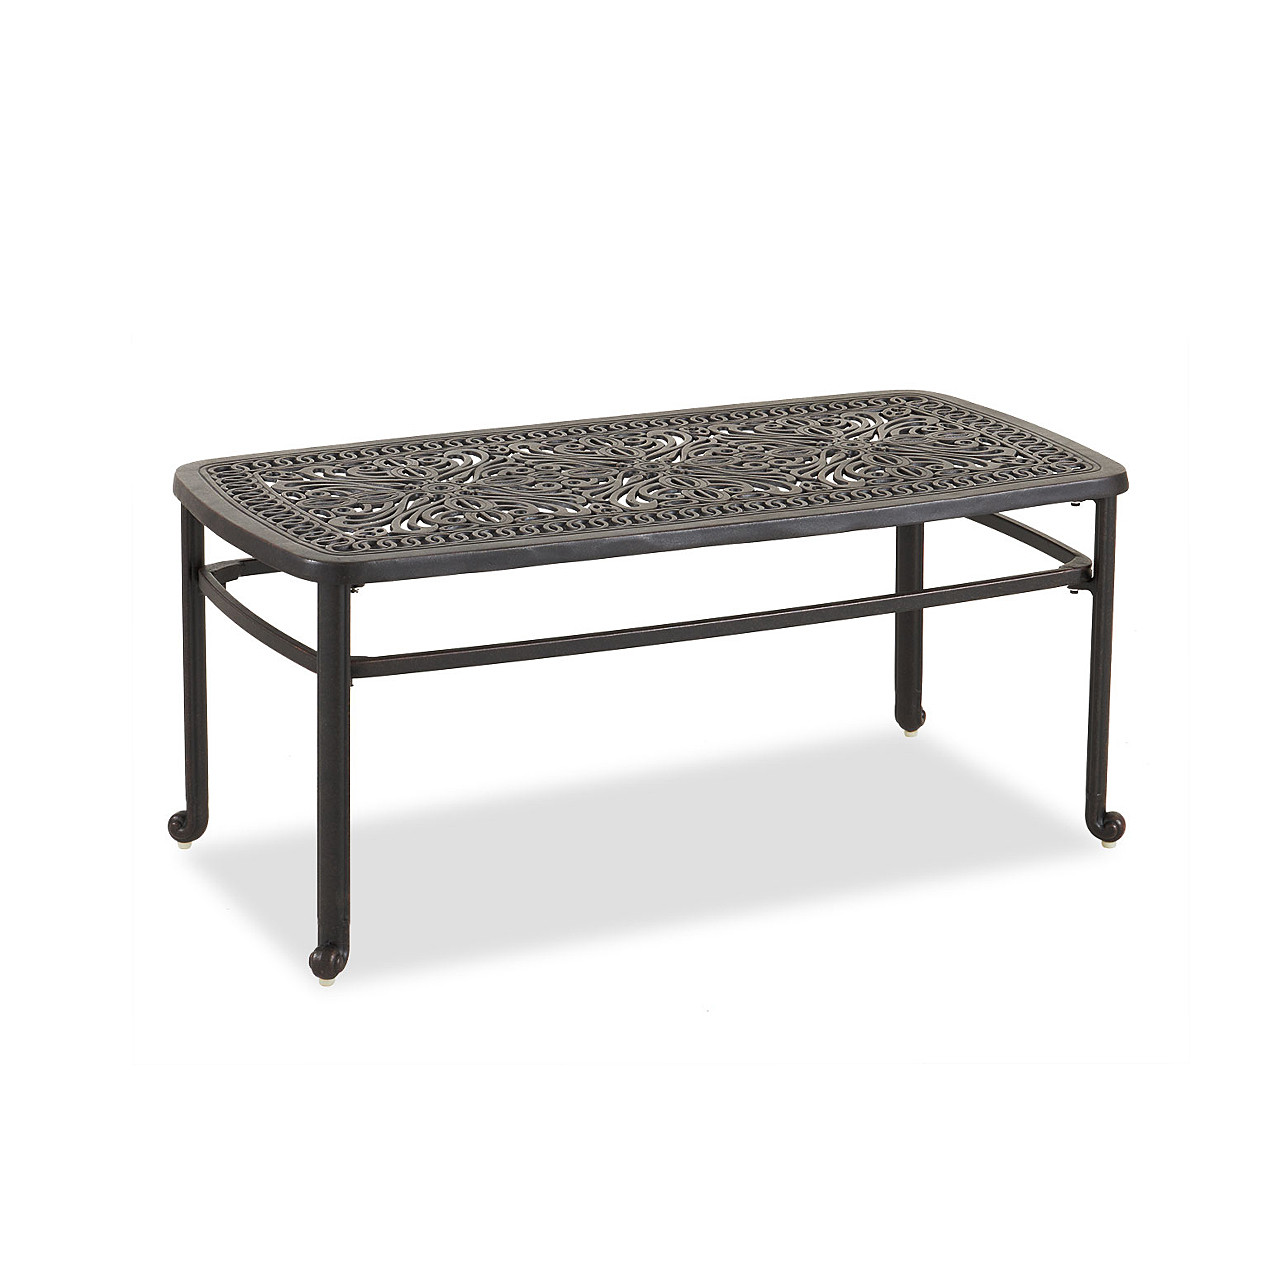 Verona Desert Bronze Cast Aluminum with Cushions 4 Pc. Loveseat Group + 42 x 21 in. Coffee Table